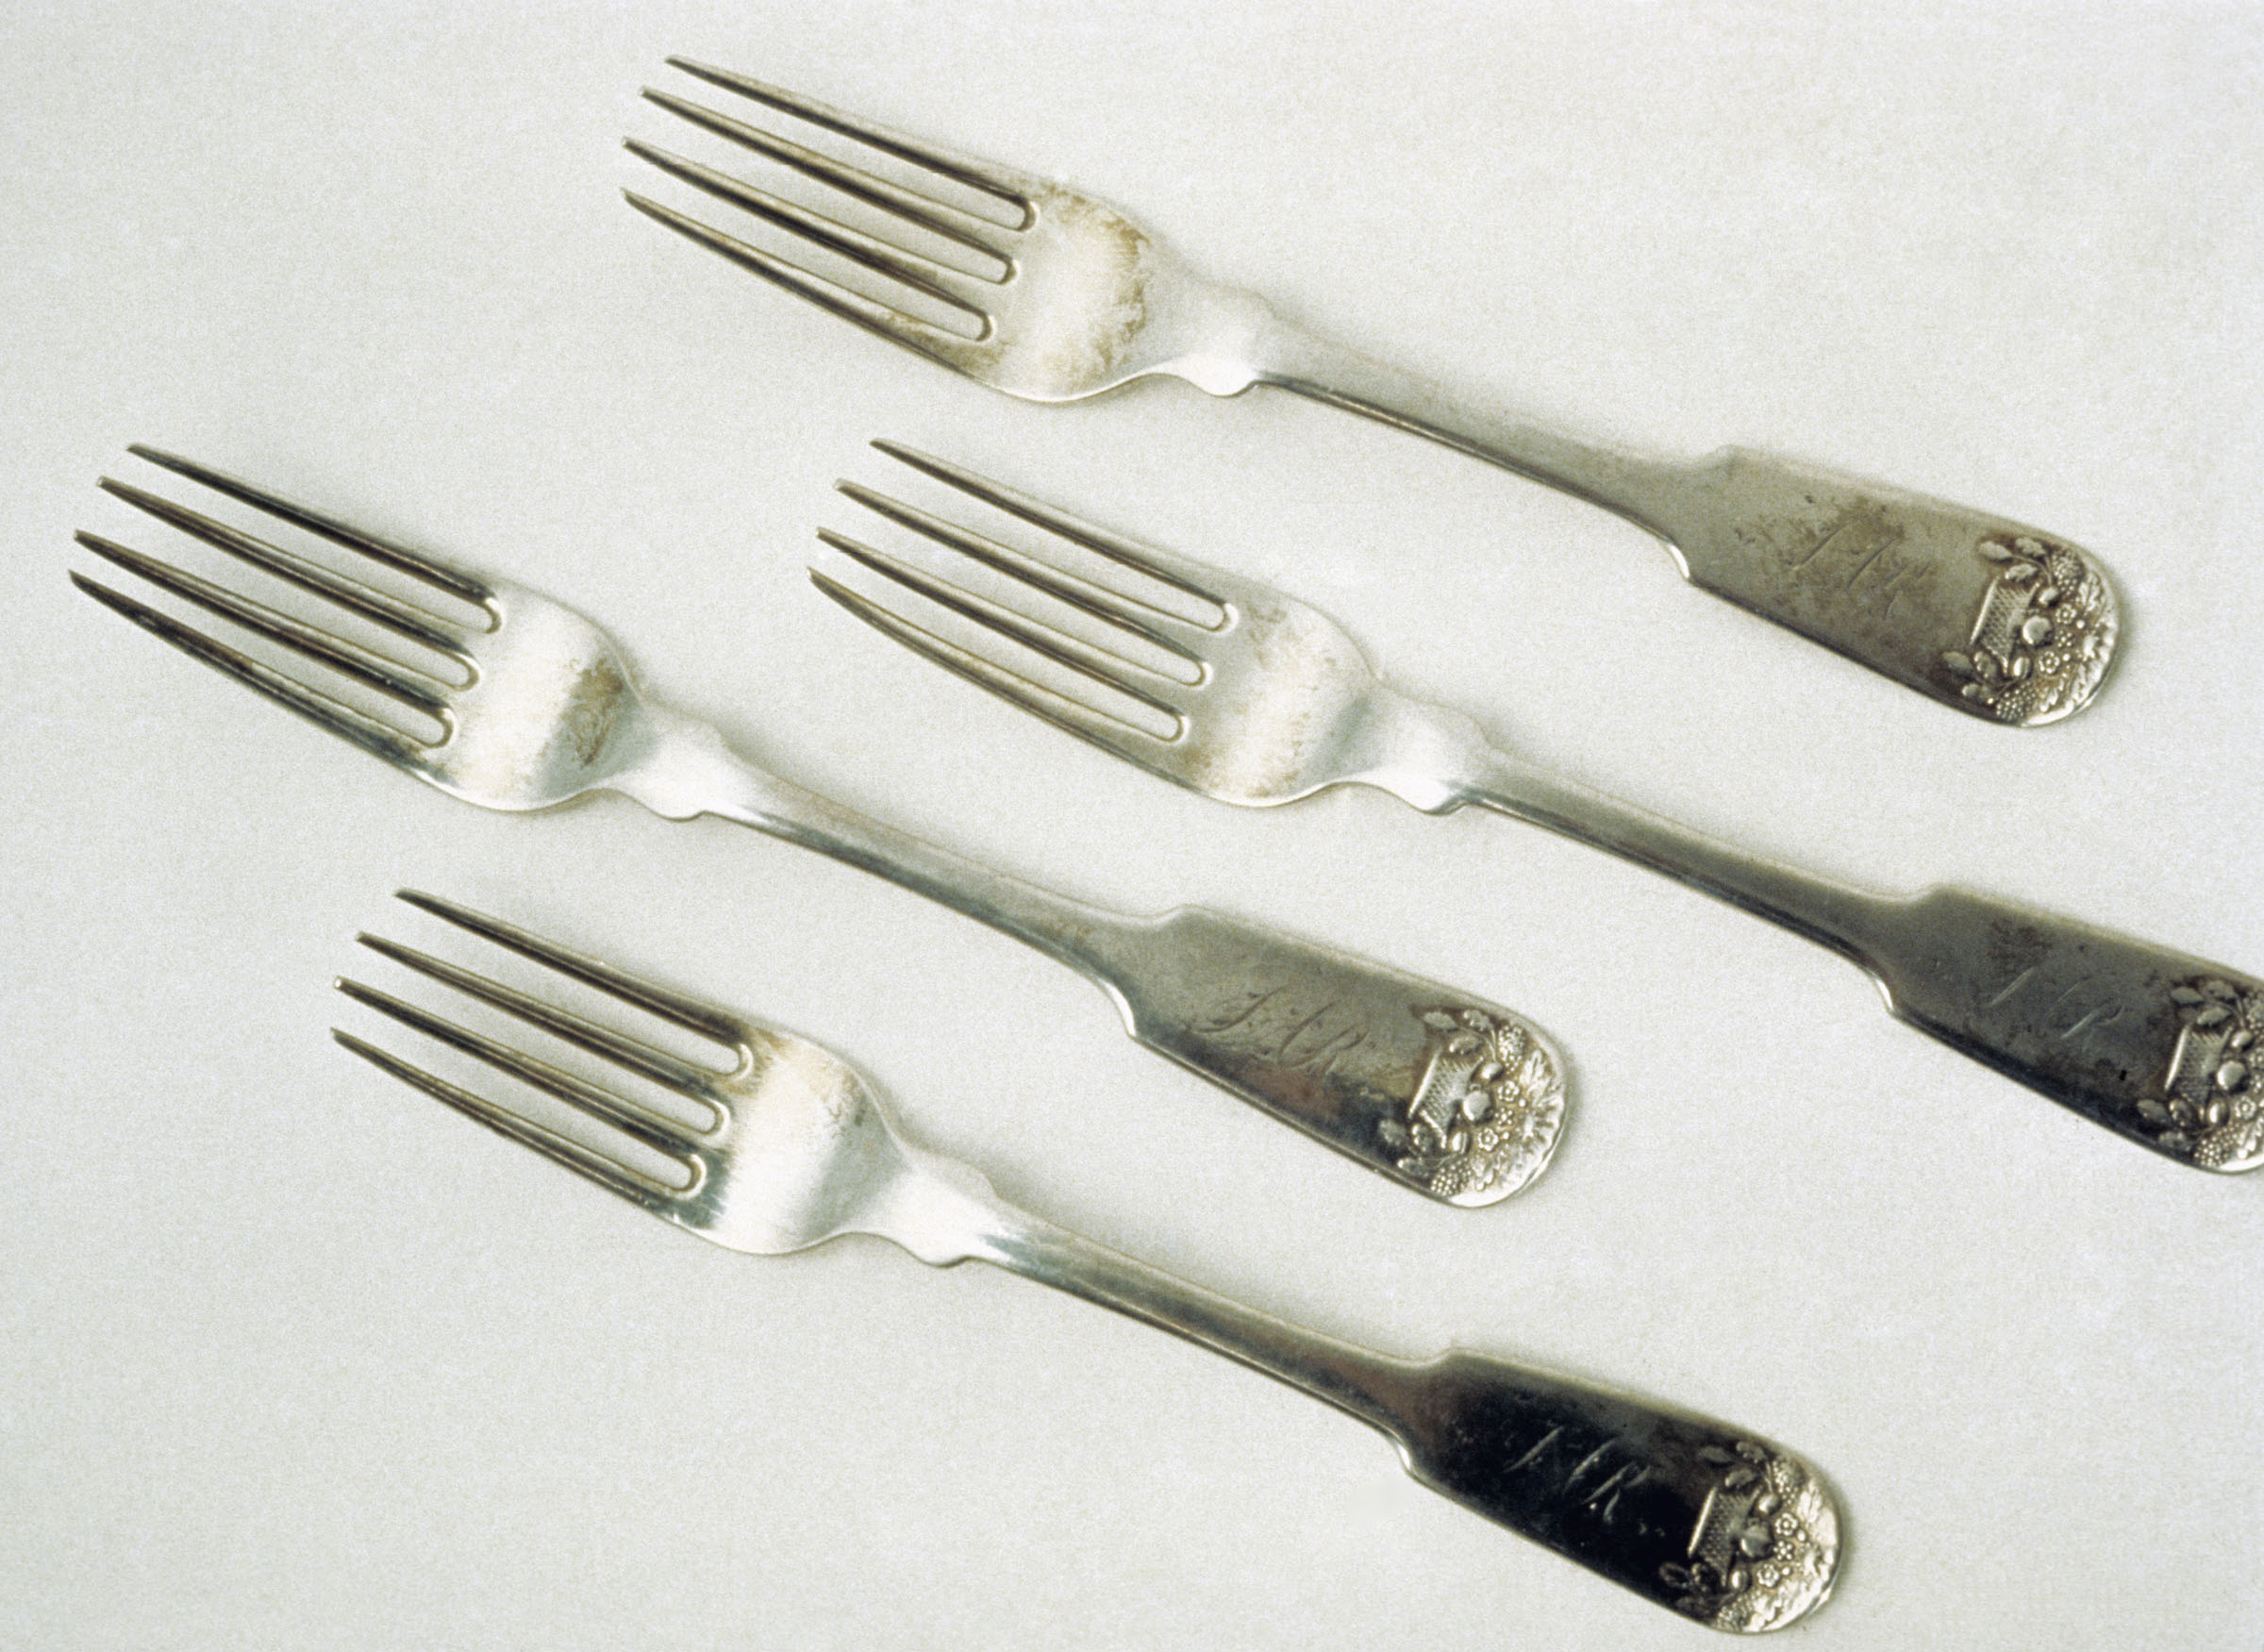 1974.0012.001, 1974.0012.002, 1974.0012.003, 1974.0012.004 Fork, Luncheon Fork, view 1